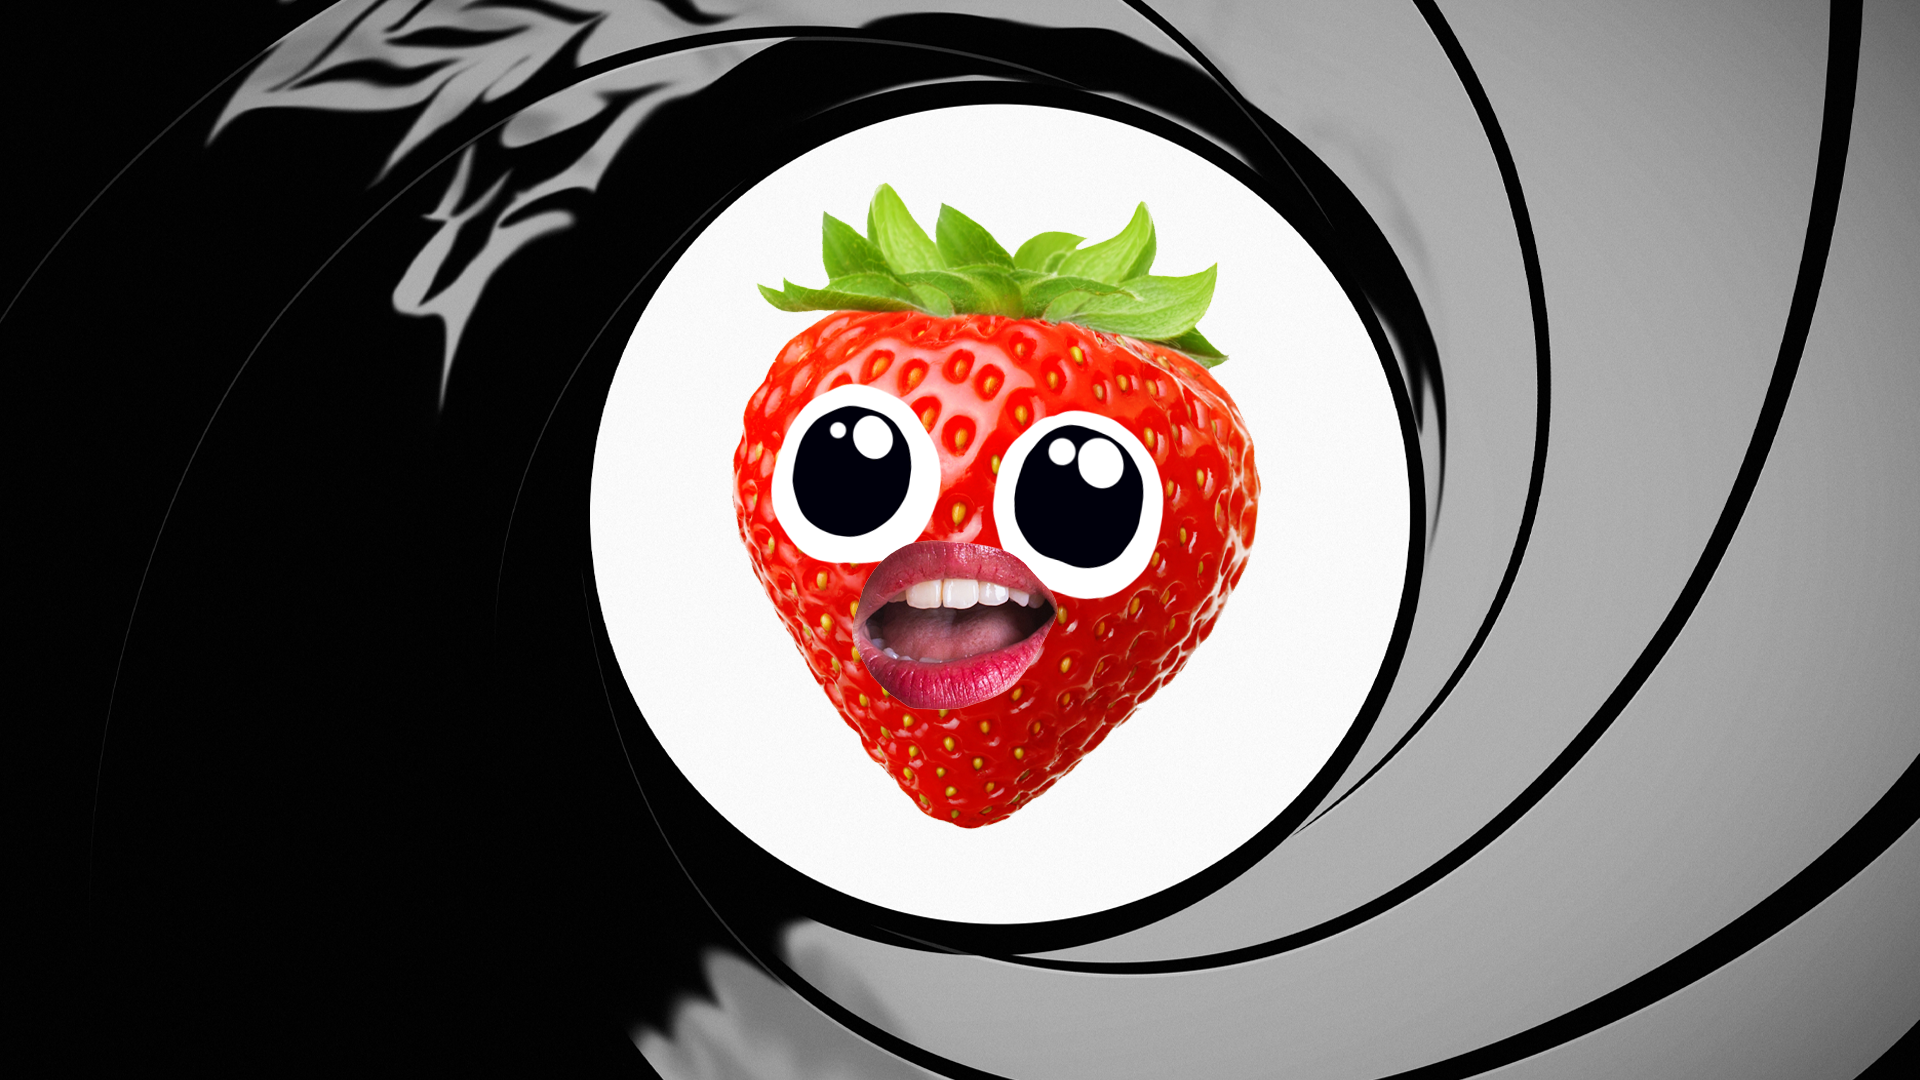 A strawberry in a James Bond style title image